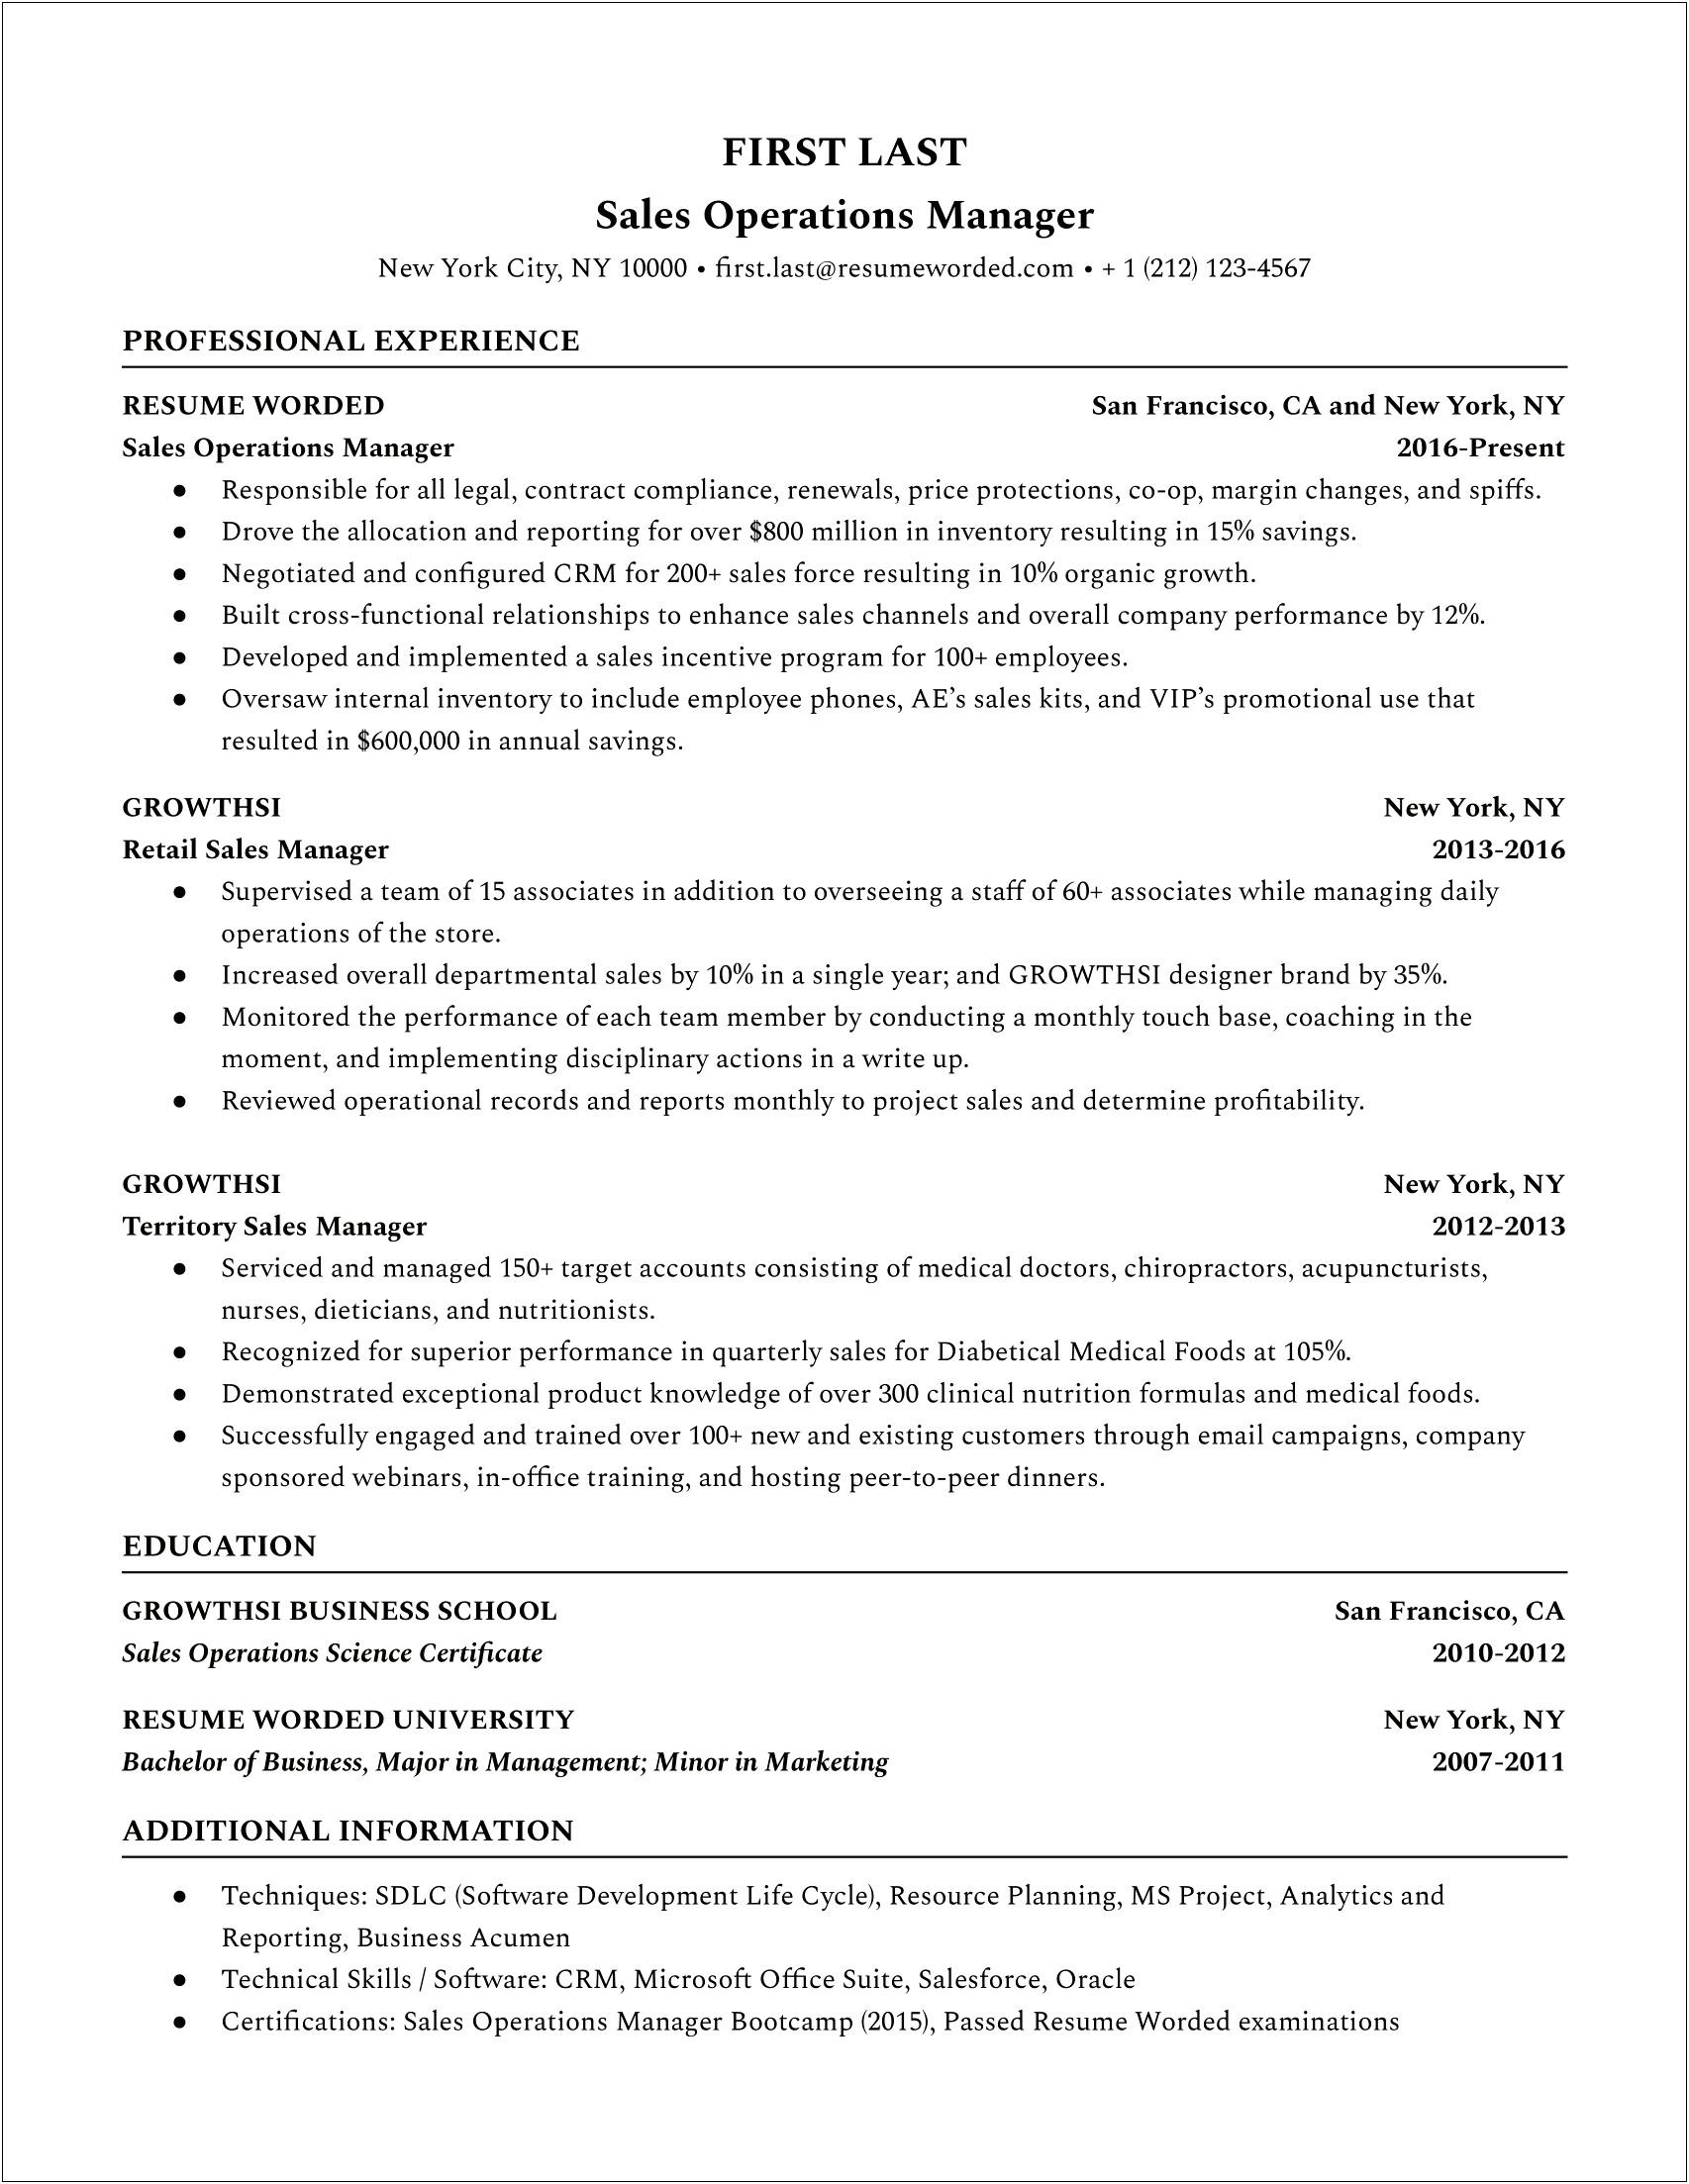 Resume Objective For Director Of Operations